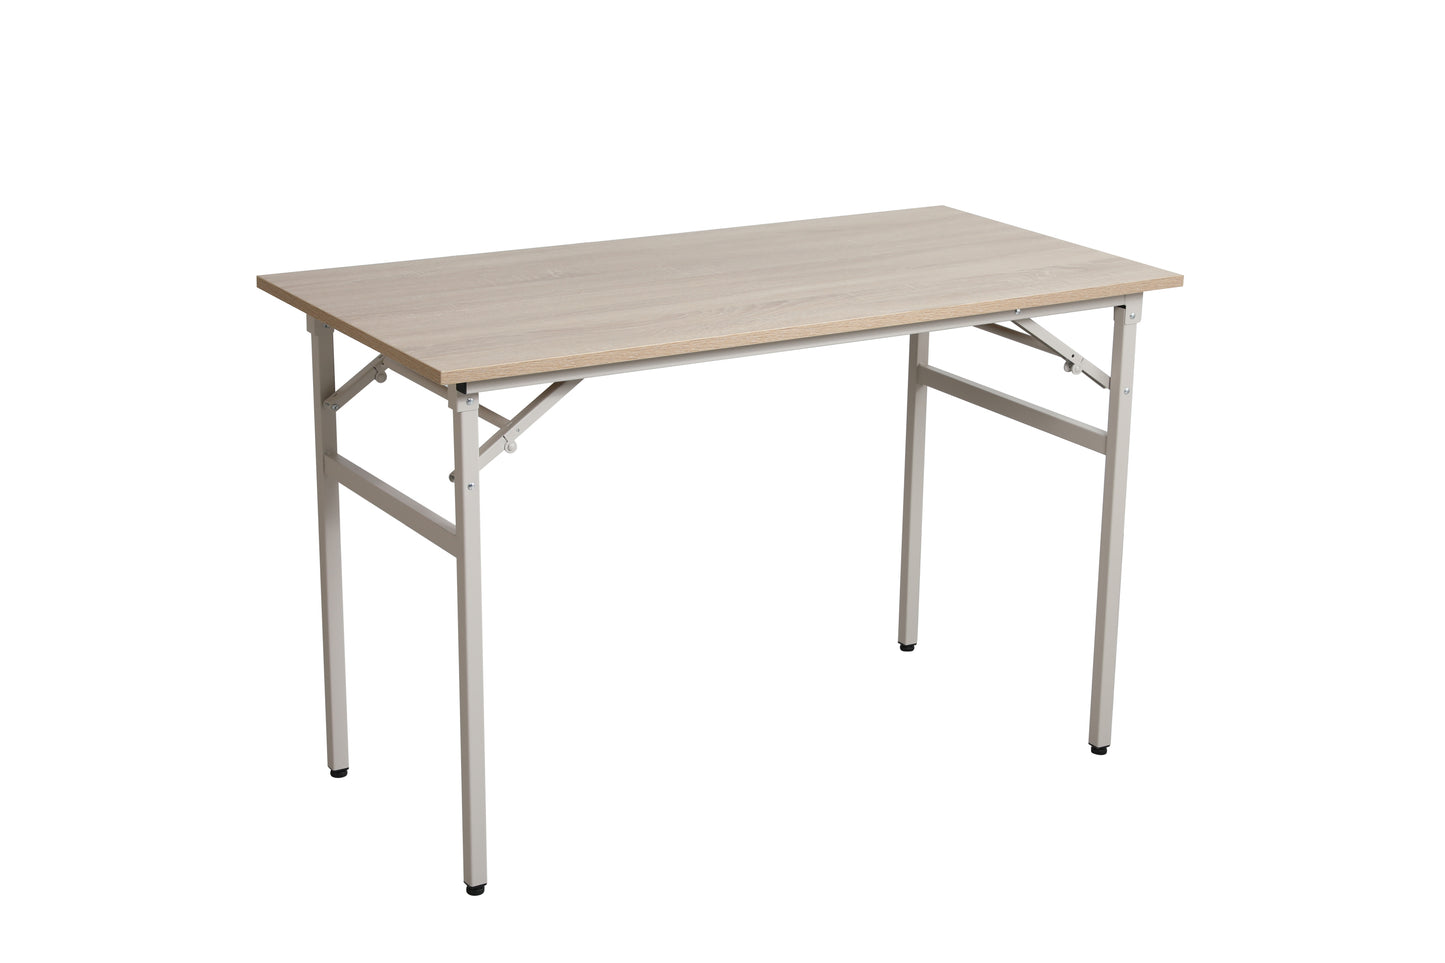 Folding Table Desk: 47x24 Inches Computer Workstation, No Install, Creamy White